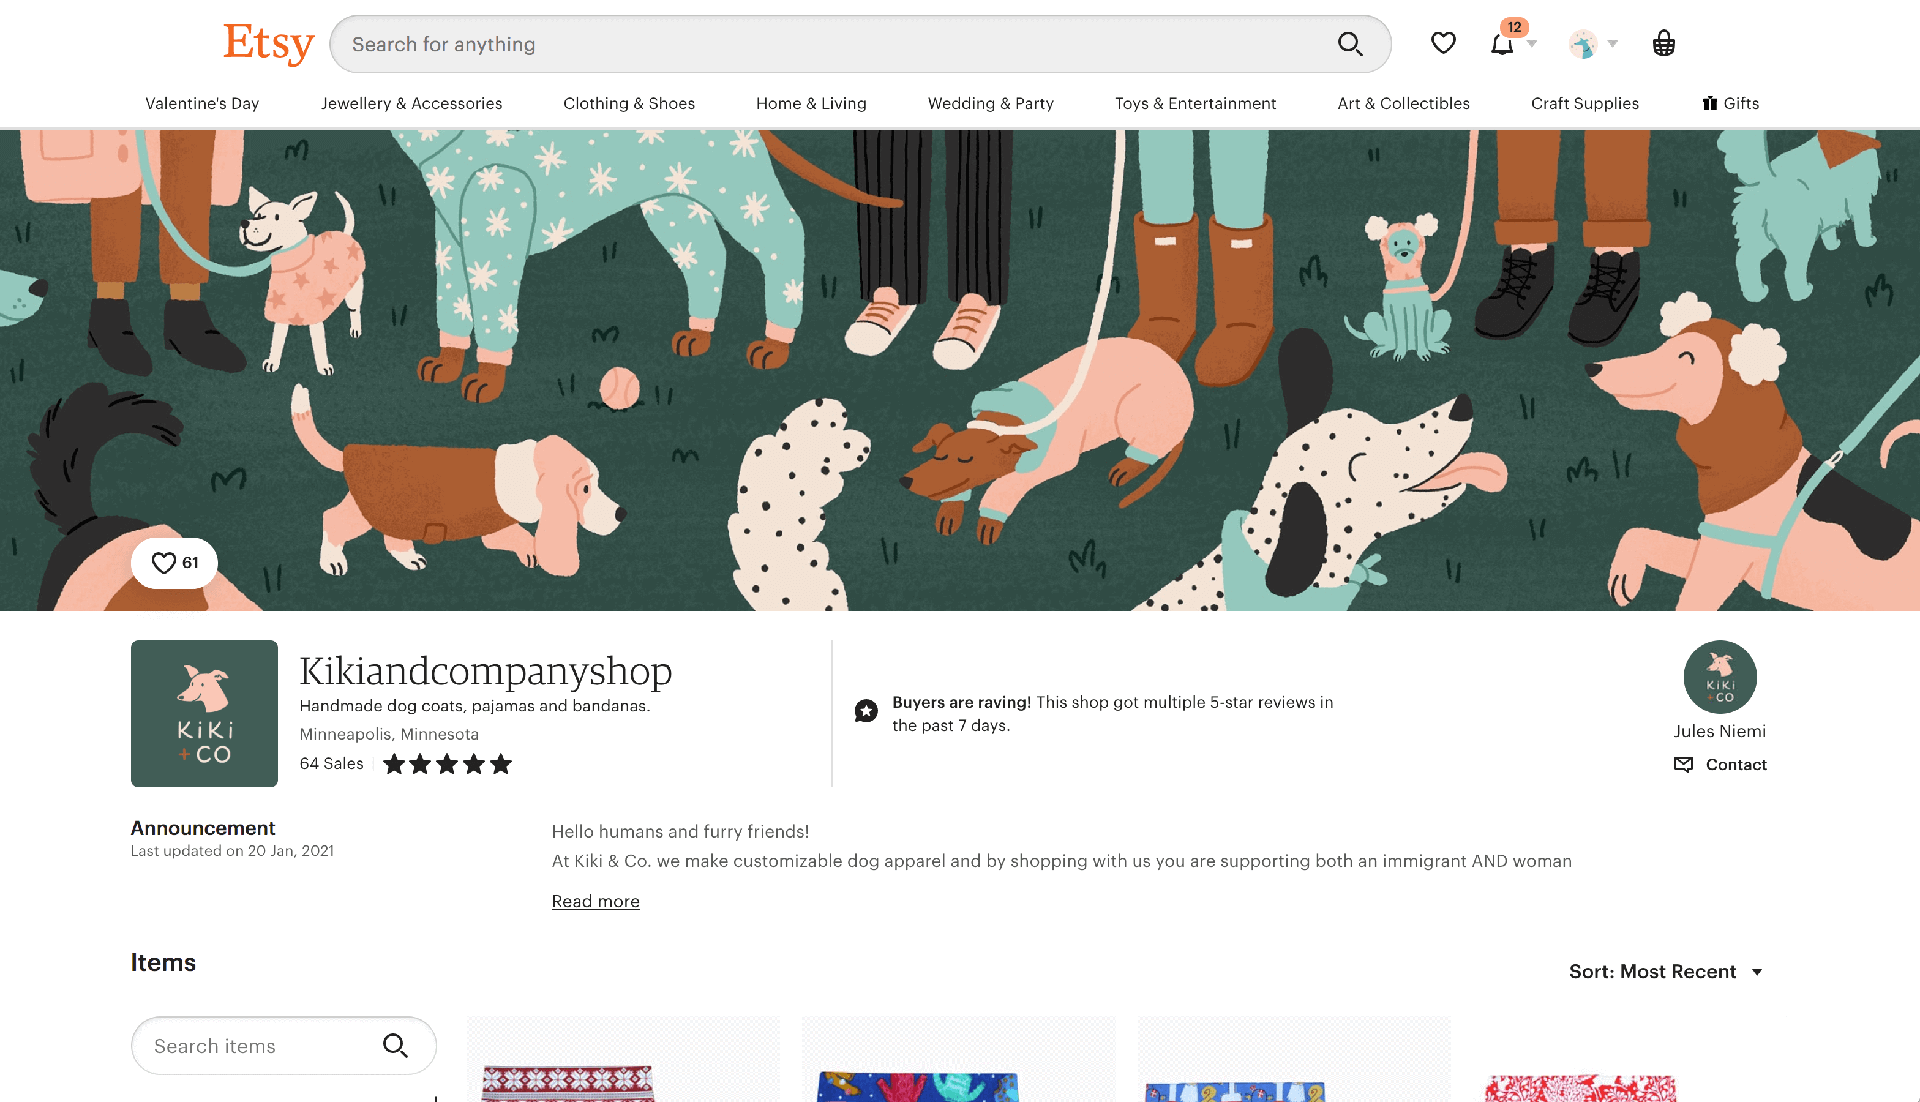 A screenshot of the Kiki&co etsy store with a header illustration of outfitted dogs in a dog park